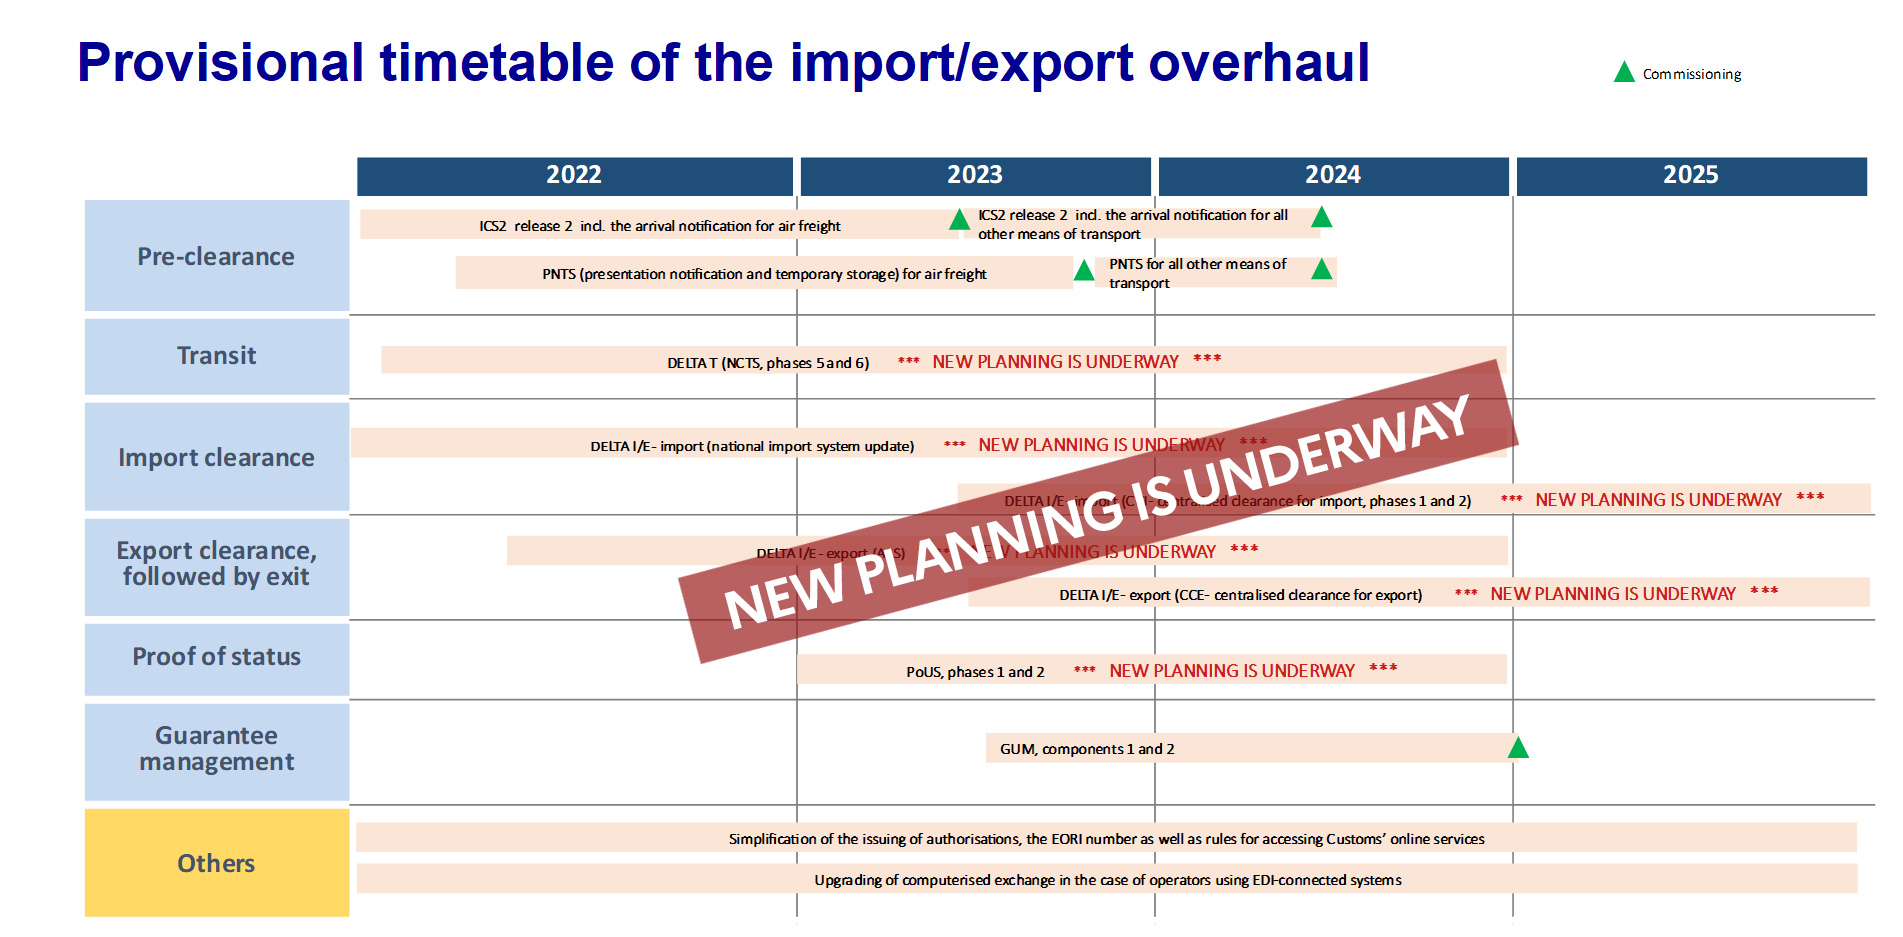 Provisional timetable of the import-export overhaul - NEW PLANNING IS UNDERWAY